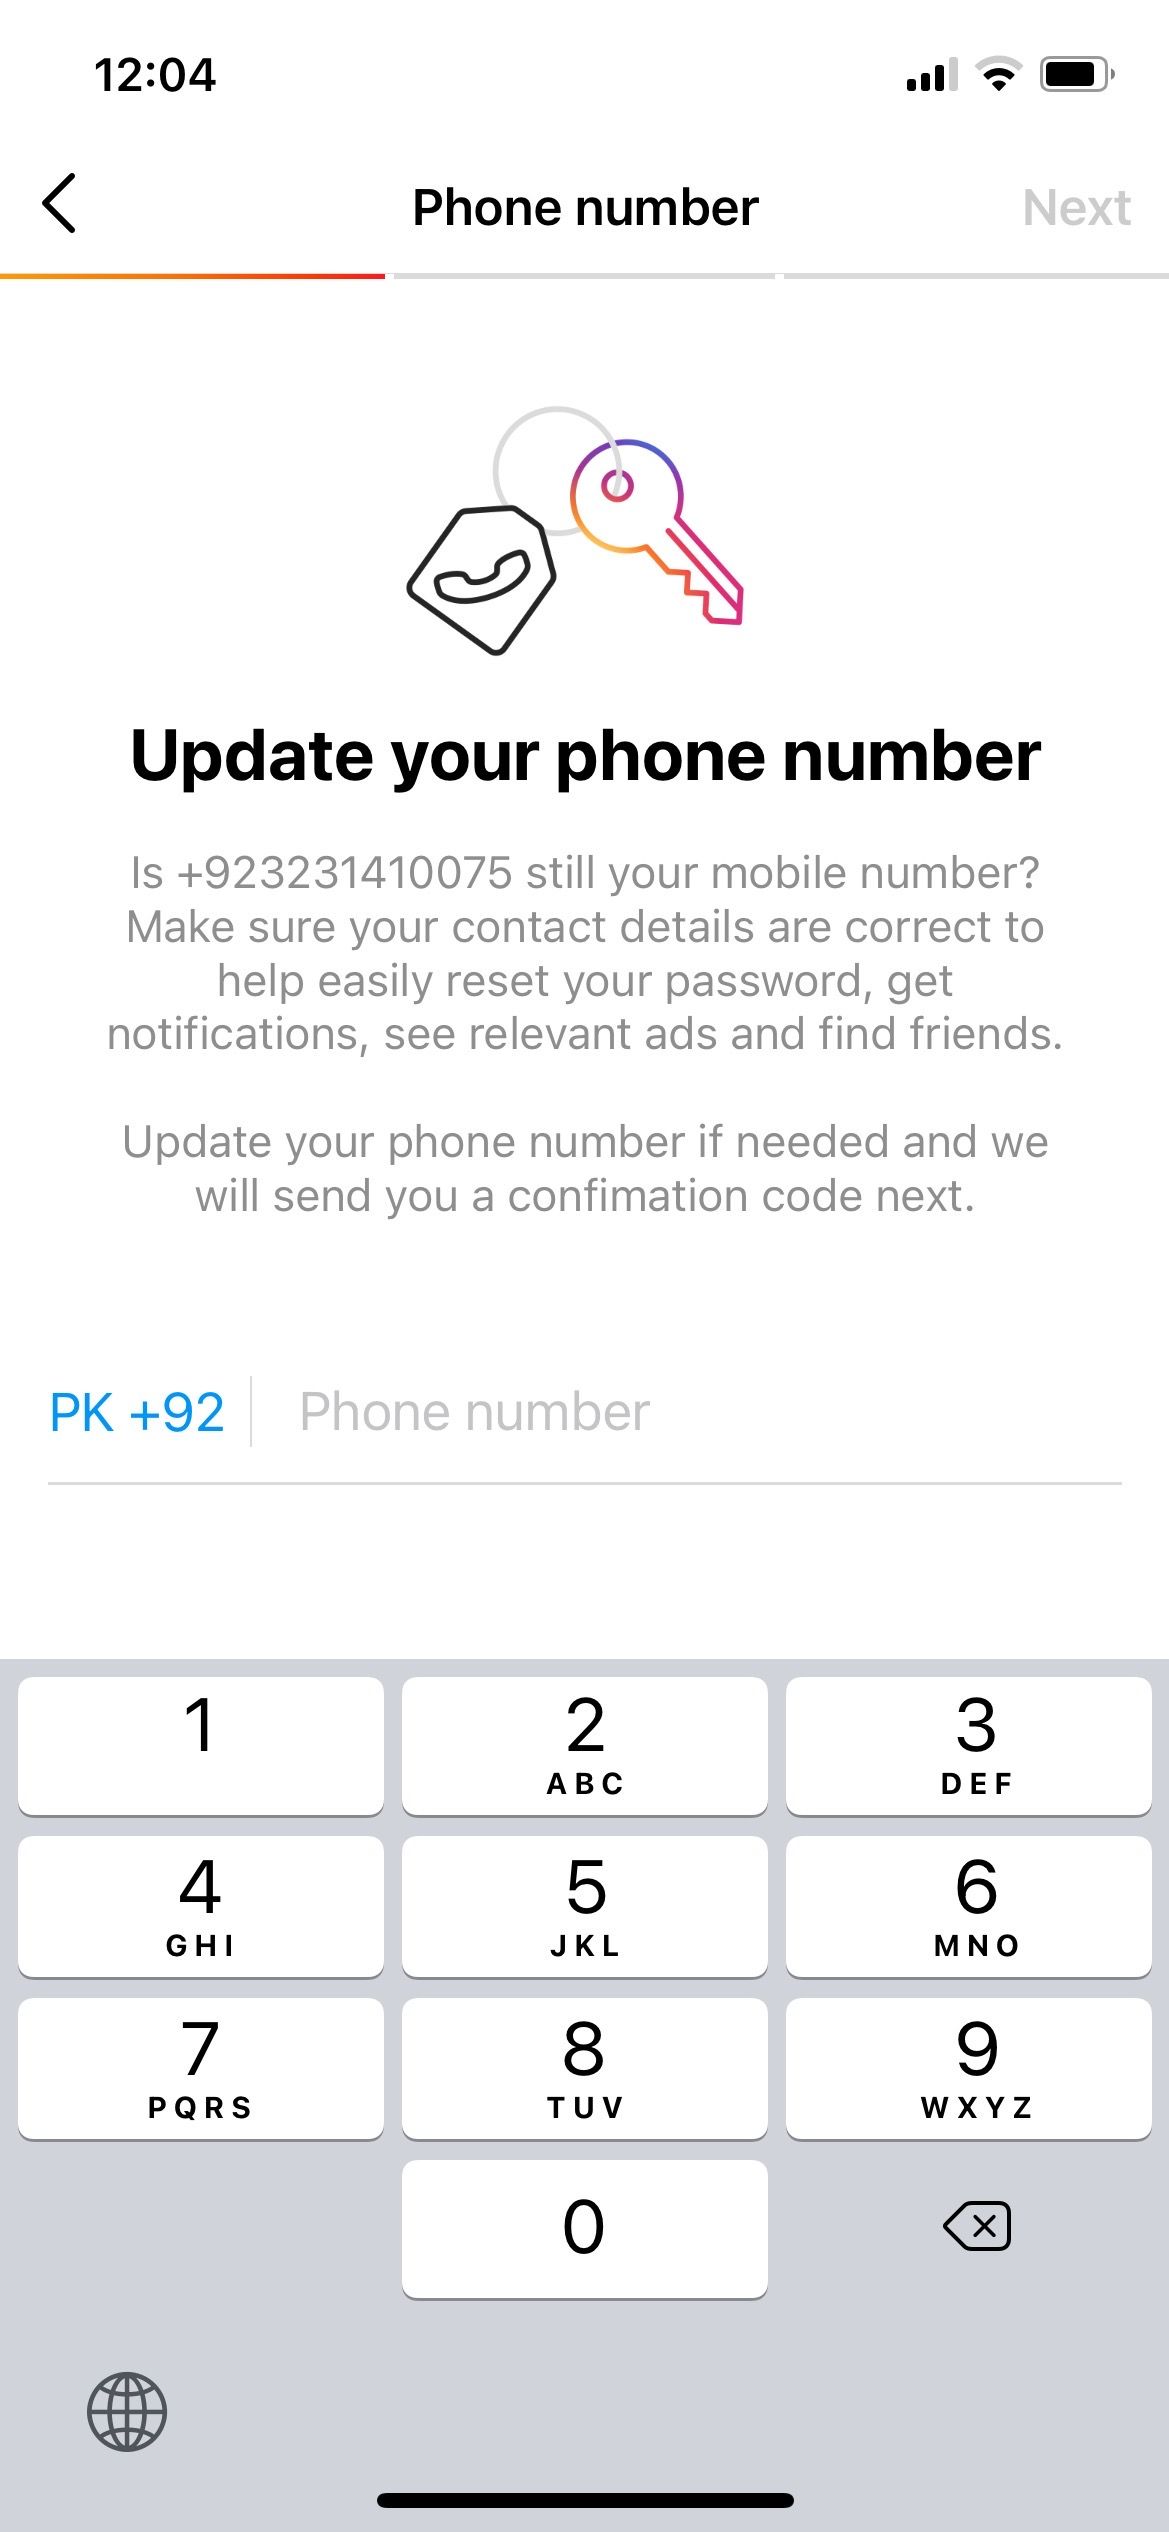 Update your phone number on Instagram